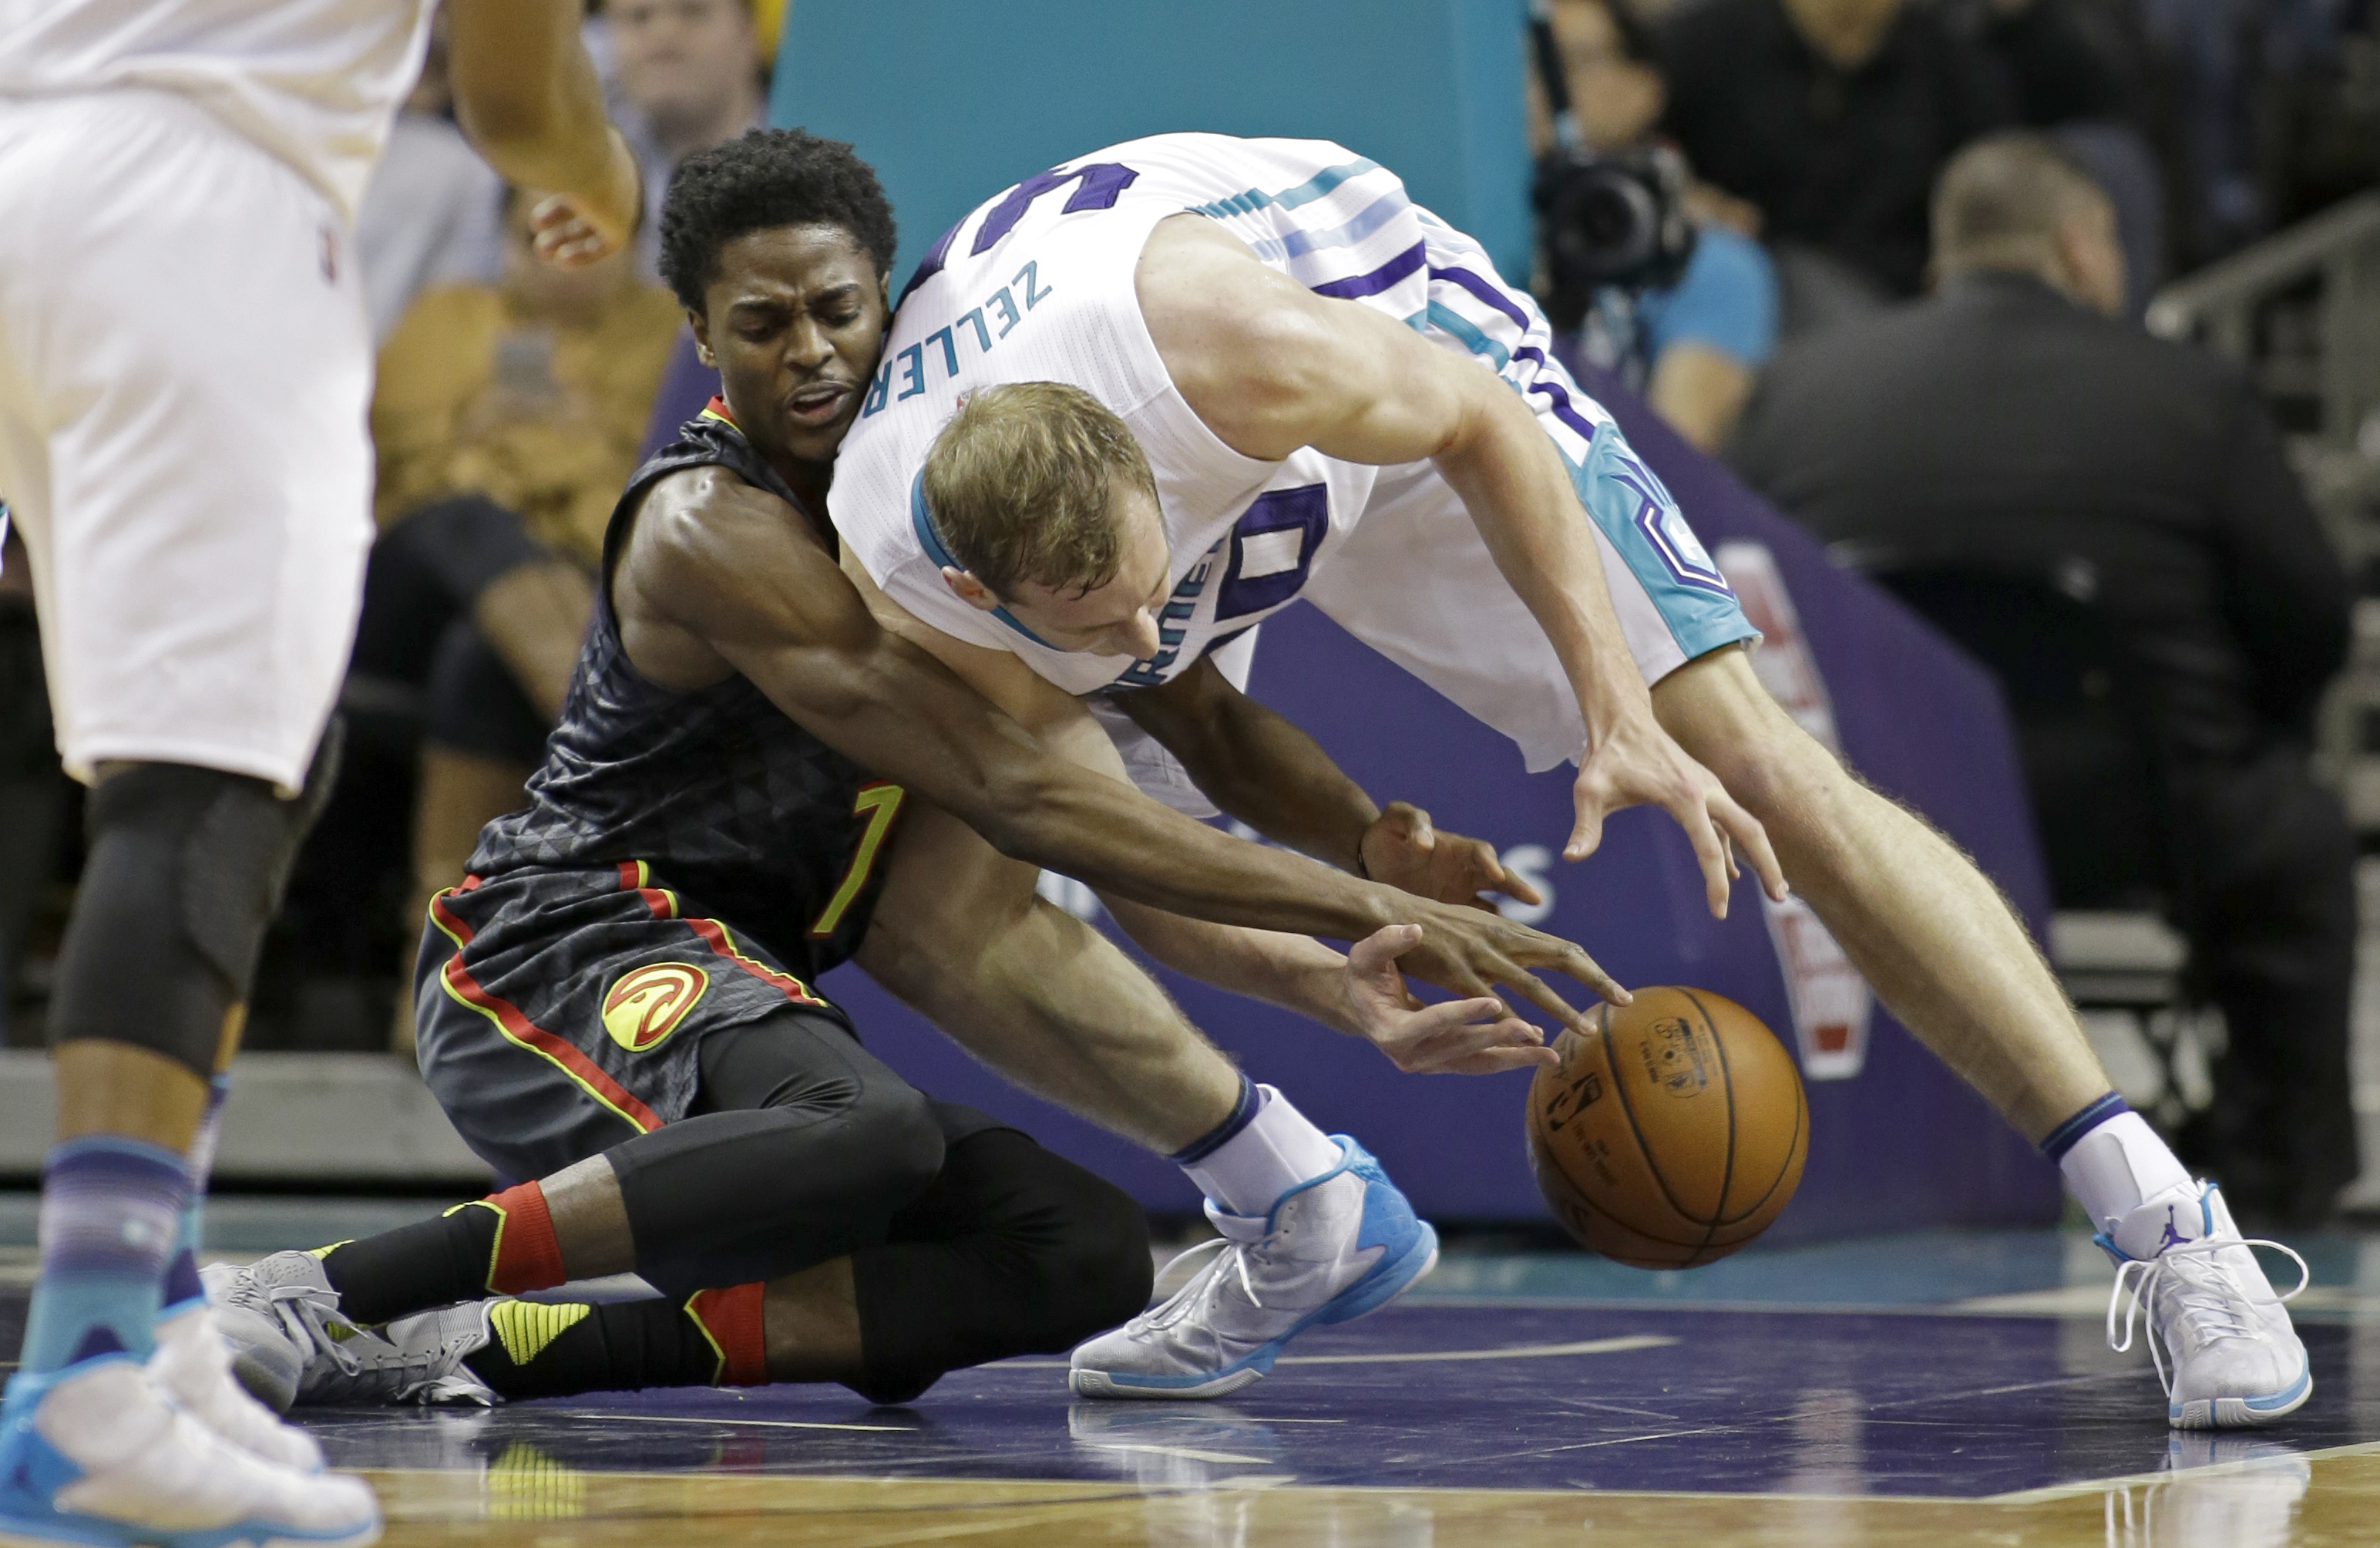 Atlanta Hawks' Justin Holiday (7) and Charlotte Hornets' Cody Zeller (40) battle for a loose ball during the second half of an NBA basketball game in Charlotte, N.C., Wednesday, Jan. 13, 2016. The Hornets won 107-84. AP